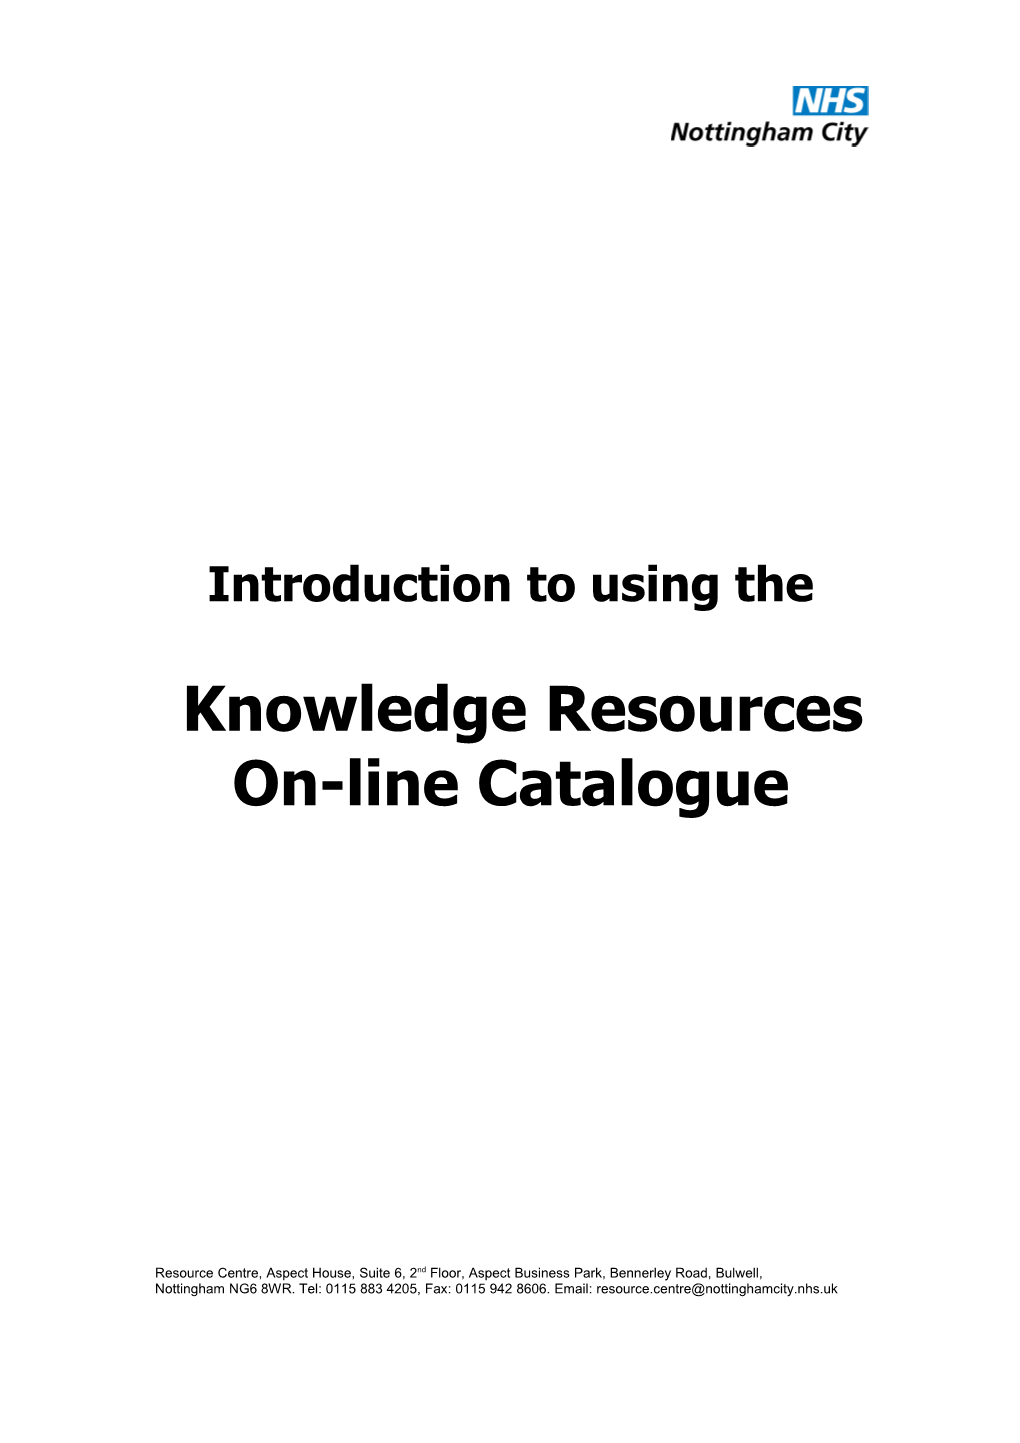 The Knowledge Resources On-Line Catalogue